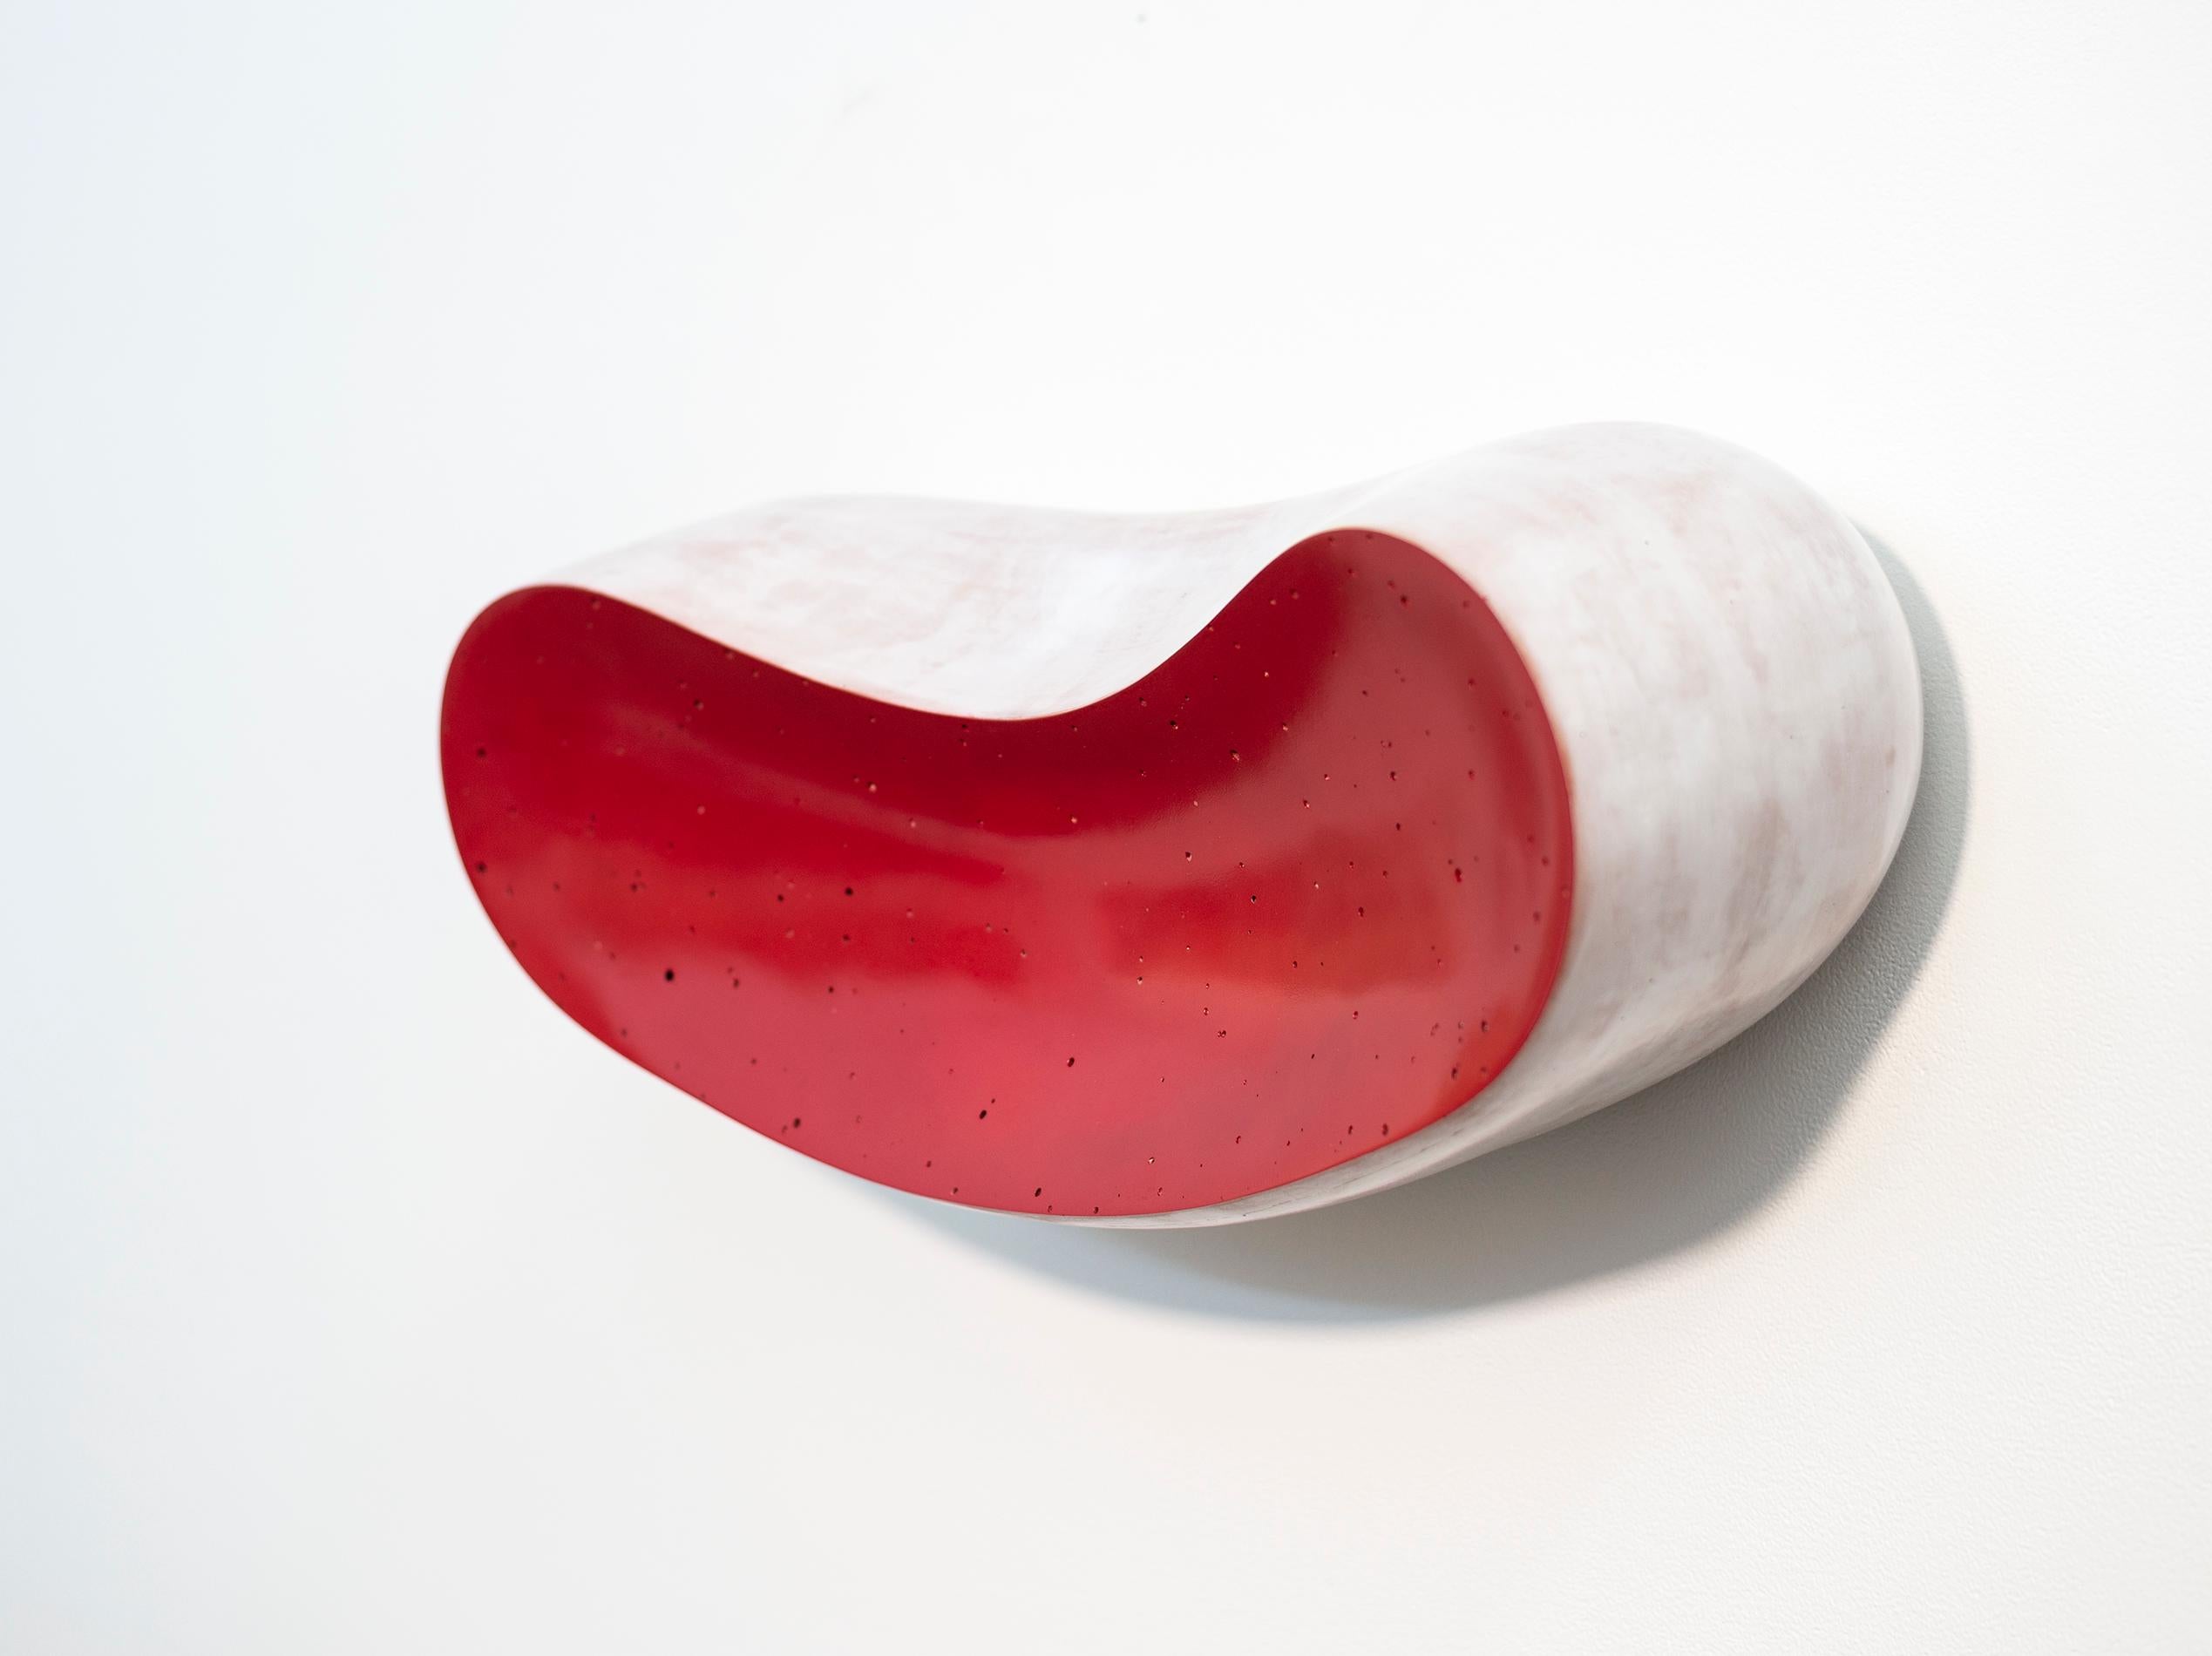 La Bouche - playful, red, white, abstract, elongated, ceramic wall sculpture For Sale 1